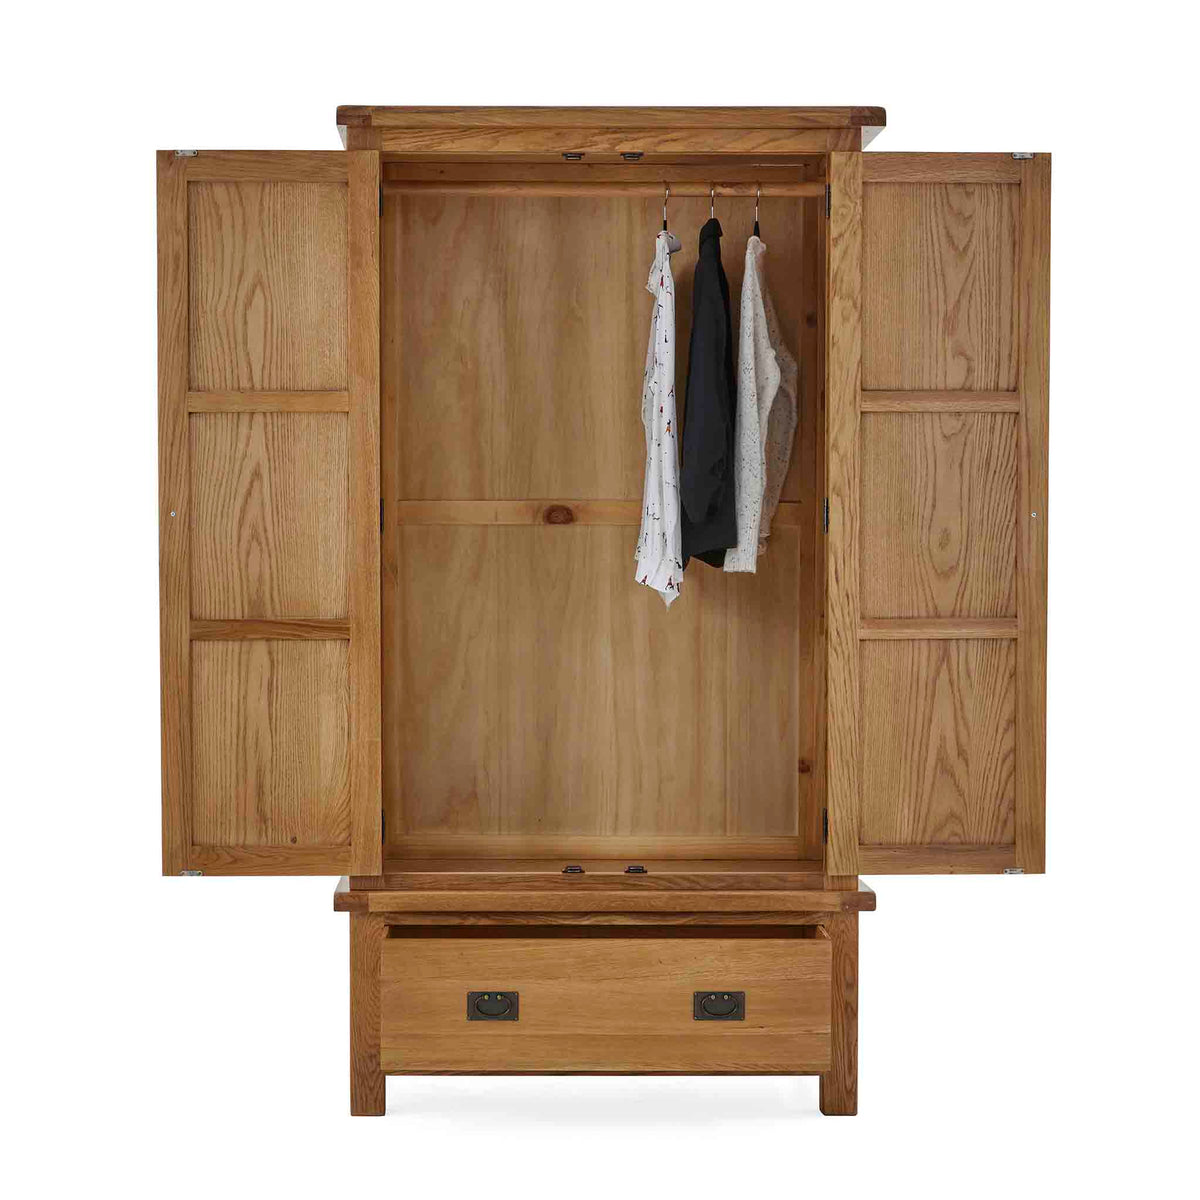 Zelah Oak Double Wardrobe with Drawer - Front view with wardrobe and drawer open